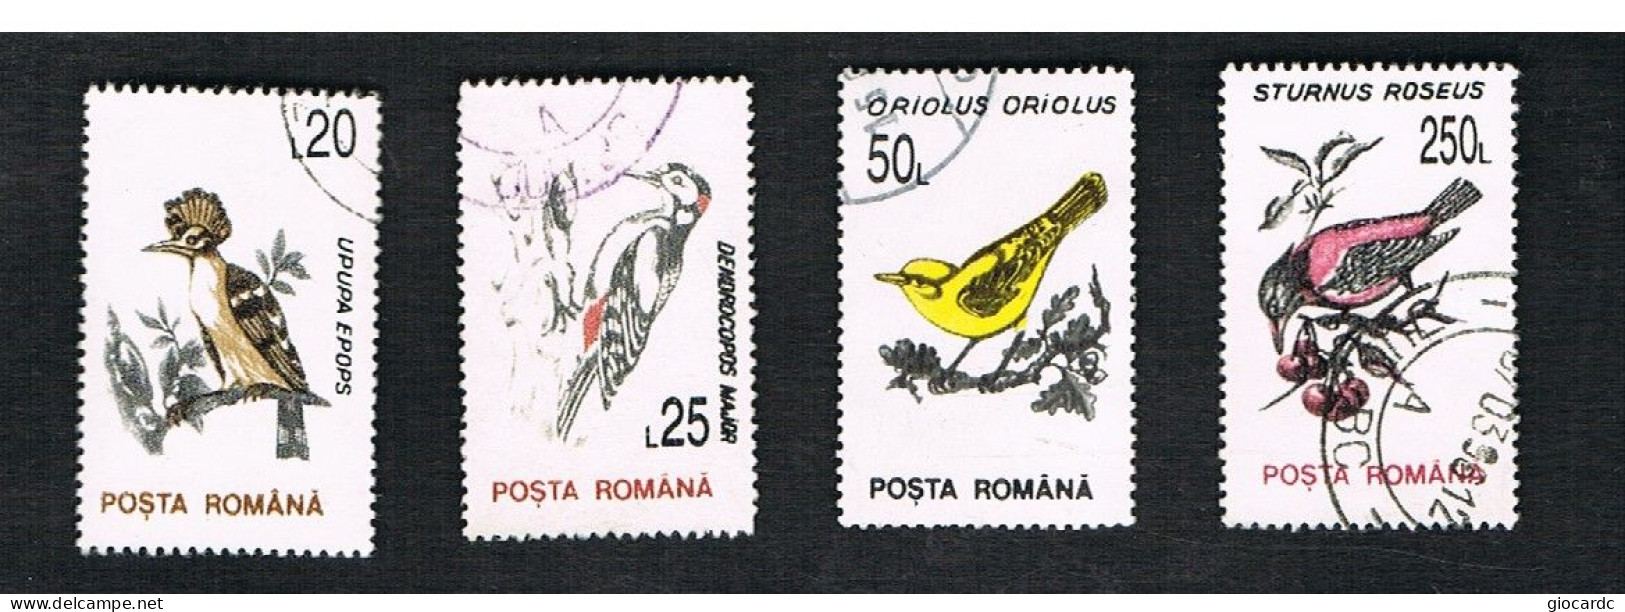 ROMANIA - SG 5510.5509  - 1993  CURRENT SERIE: BIRDS (4 STAMPS OF THE SET ON WHITE PAPER)  - USED ° - - Gebraucht